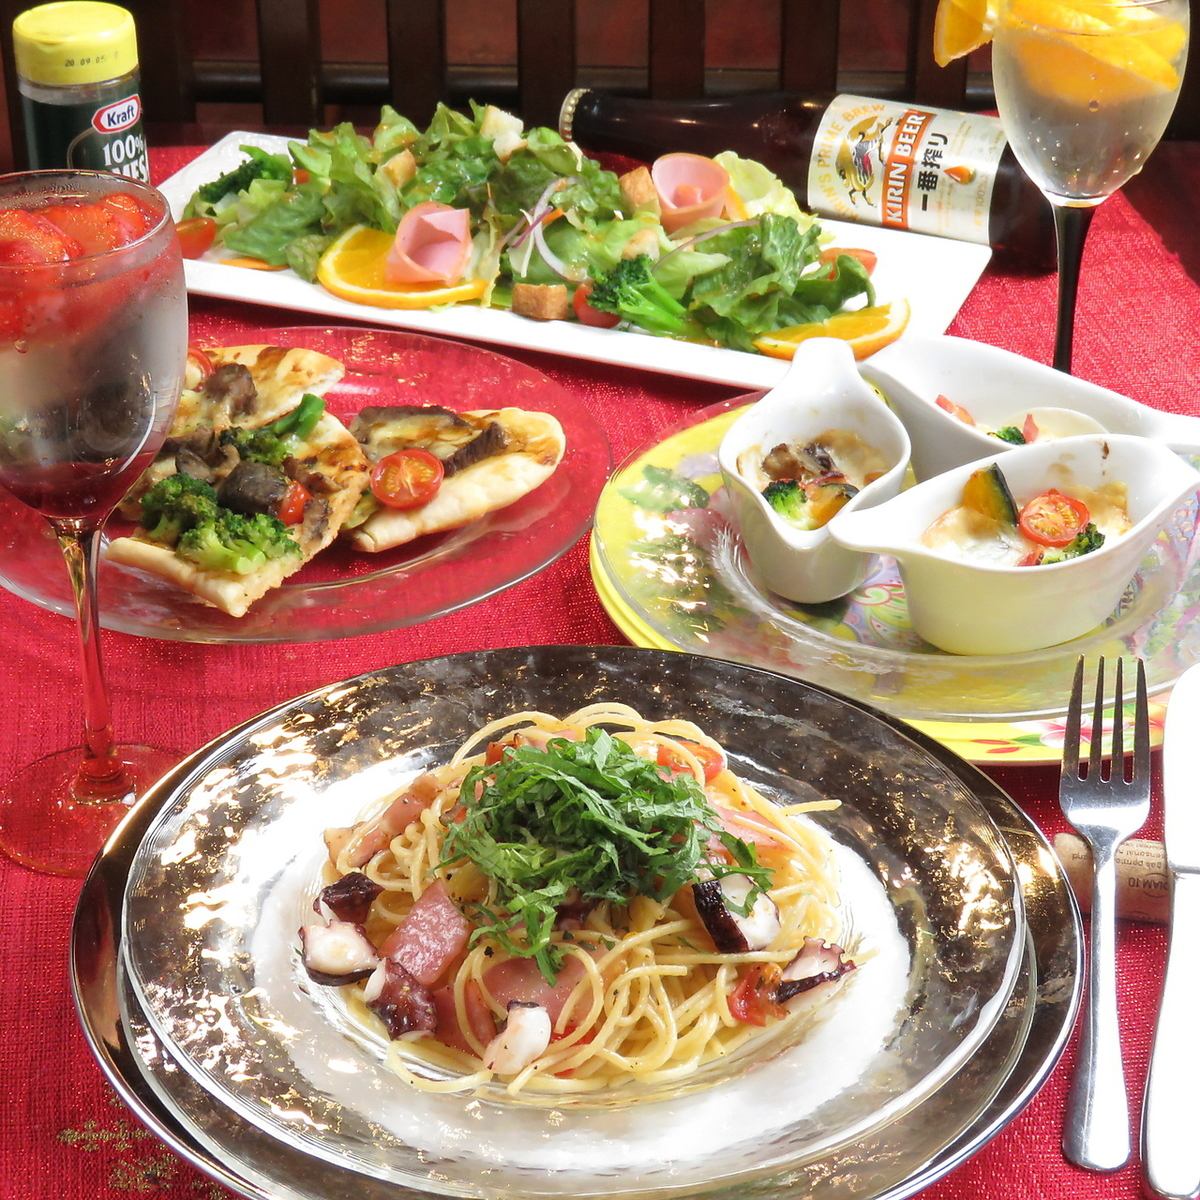 [Near Rokkomichi Station] Morning, lunch, and dinner set menus available! Western food cafe